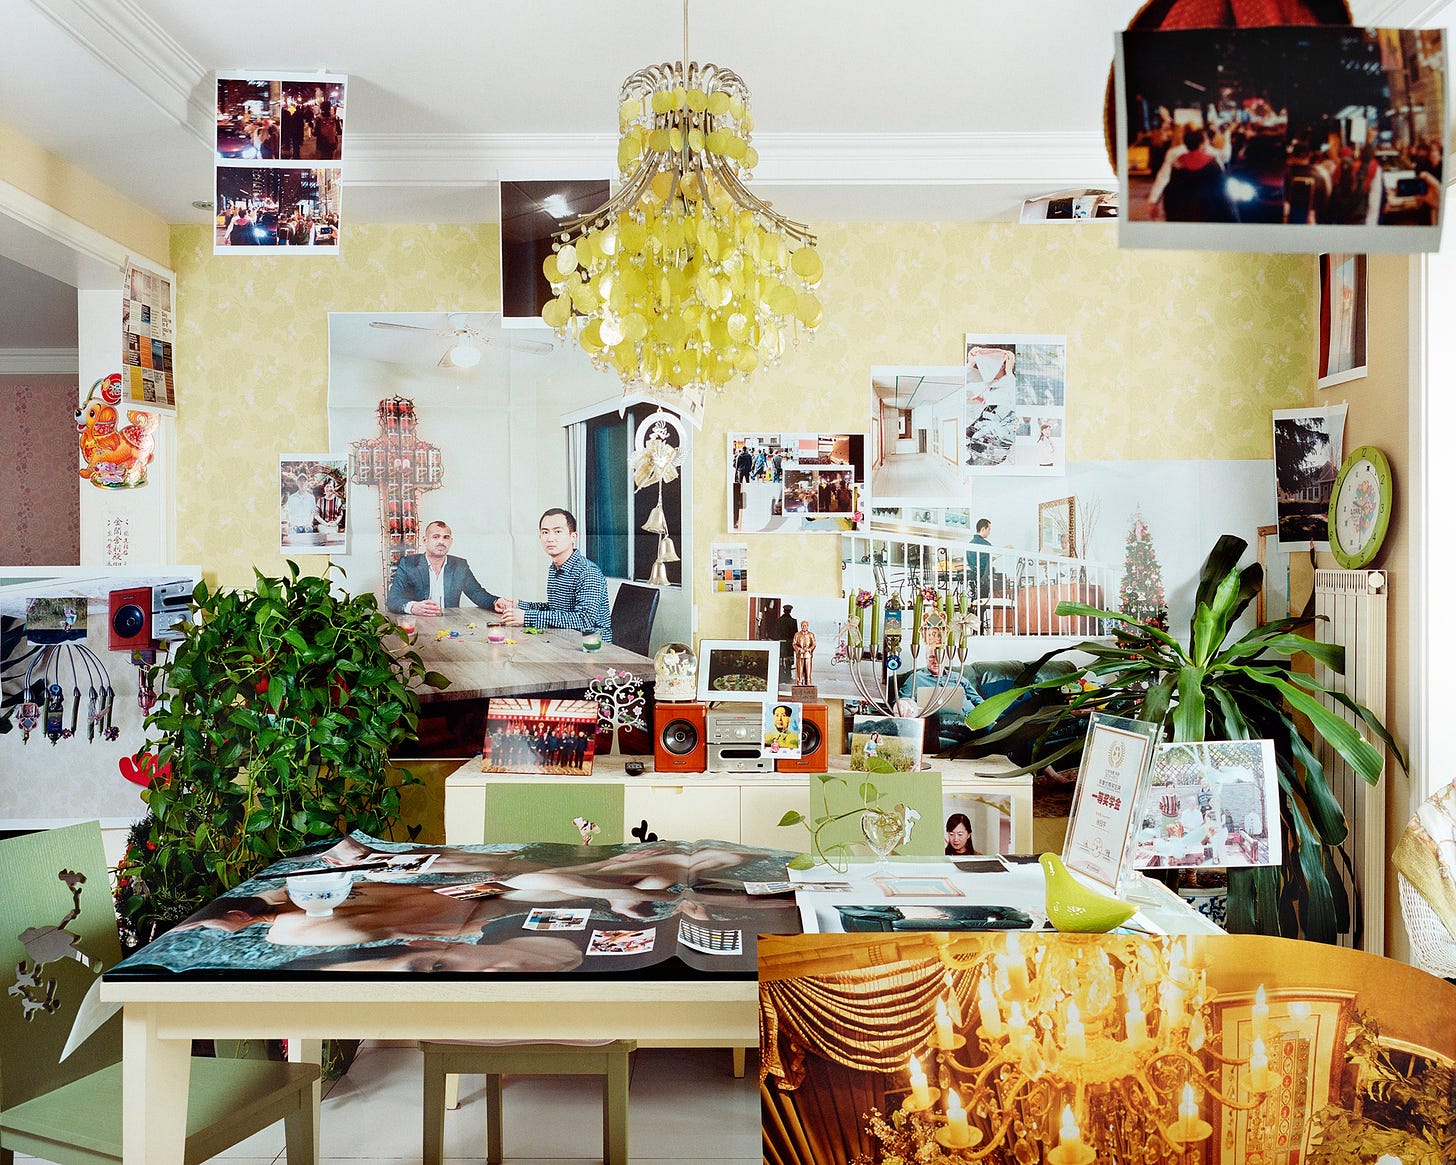 A Chinese Photographer's Secret Installations Inside His Parents' Home |  The New Yorker